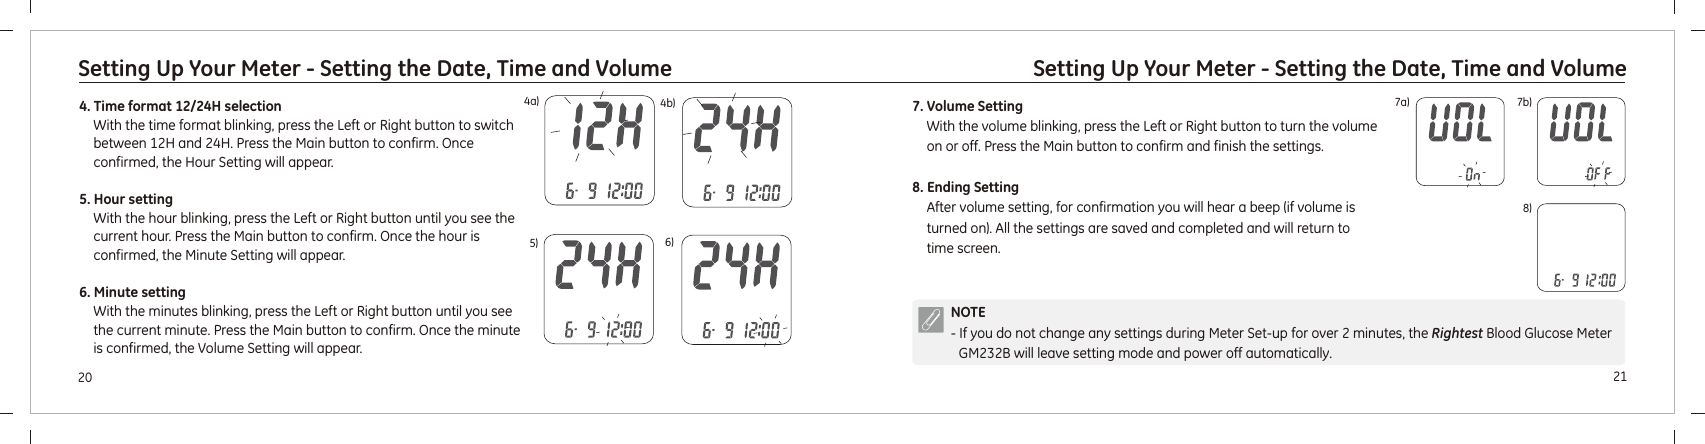 2120Setting Up Your Meter - Setting the Date, Time and VolumeSetting Up Your Meter - Setting the Date, Time and Volume4. Time format 12/24H selectionWith the time format blinking, press the Left or Right button to switch between 12H and 24H. Press the Main button to confirm. 5. Hour settingWith the hour blinking, press the Left or Right button until you see the current hour. Press the Main button to confirm. 6. Minute settingWith the minutes blinking, press the Left or Right button until you see the current minute. Press the Main button to confirm. Once confirmed, the Hour Setting will appear. Once the hour is confirmed, the Minute Setting will appear.Once the minute is confirmed, the Volume Setting will appear.5) 6)4a) 4b)NOTE- If you do not change any settings during Meter Set-up for over 2 minutes, the  Blood Glucose Meter  will leave setting mode and power off automatically. RightestGM232B7a) 7b)7. Volume SettingWith the volume blinking, press the Left or Right button to turn the volume on or off. Press the Main button to confirm and finish the settings.8. Ending SettingAfter volume setting, for confirmation you will hear a beep (if volume is turned on). All the settings are saved and completed and will return to time screen. 8)